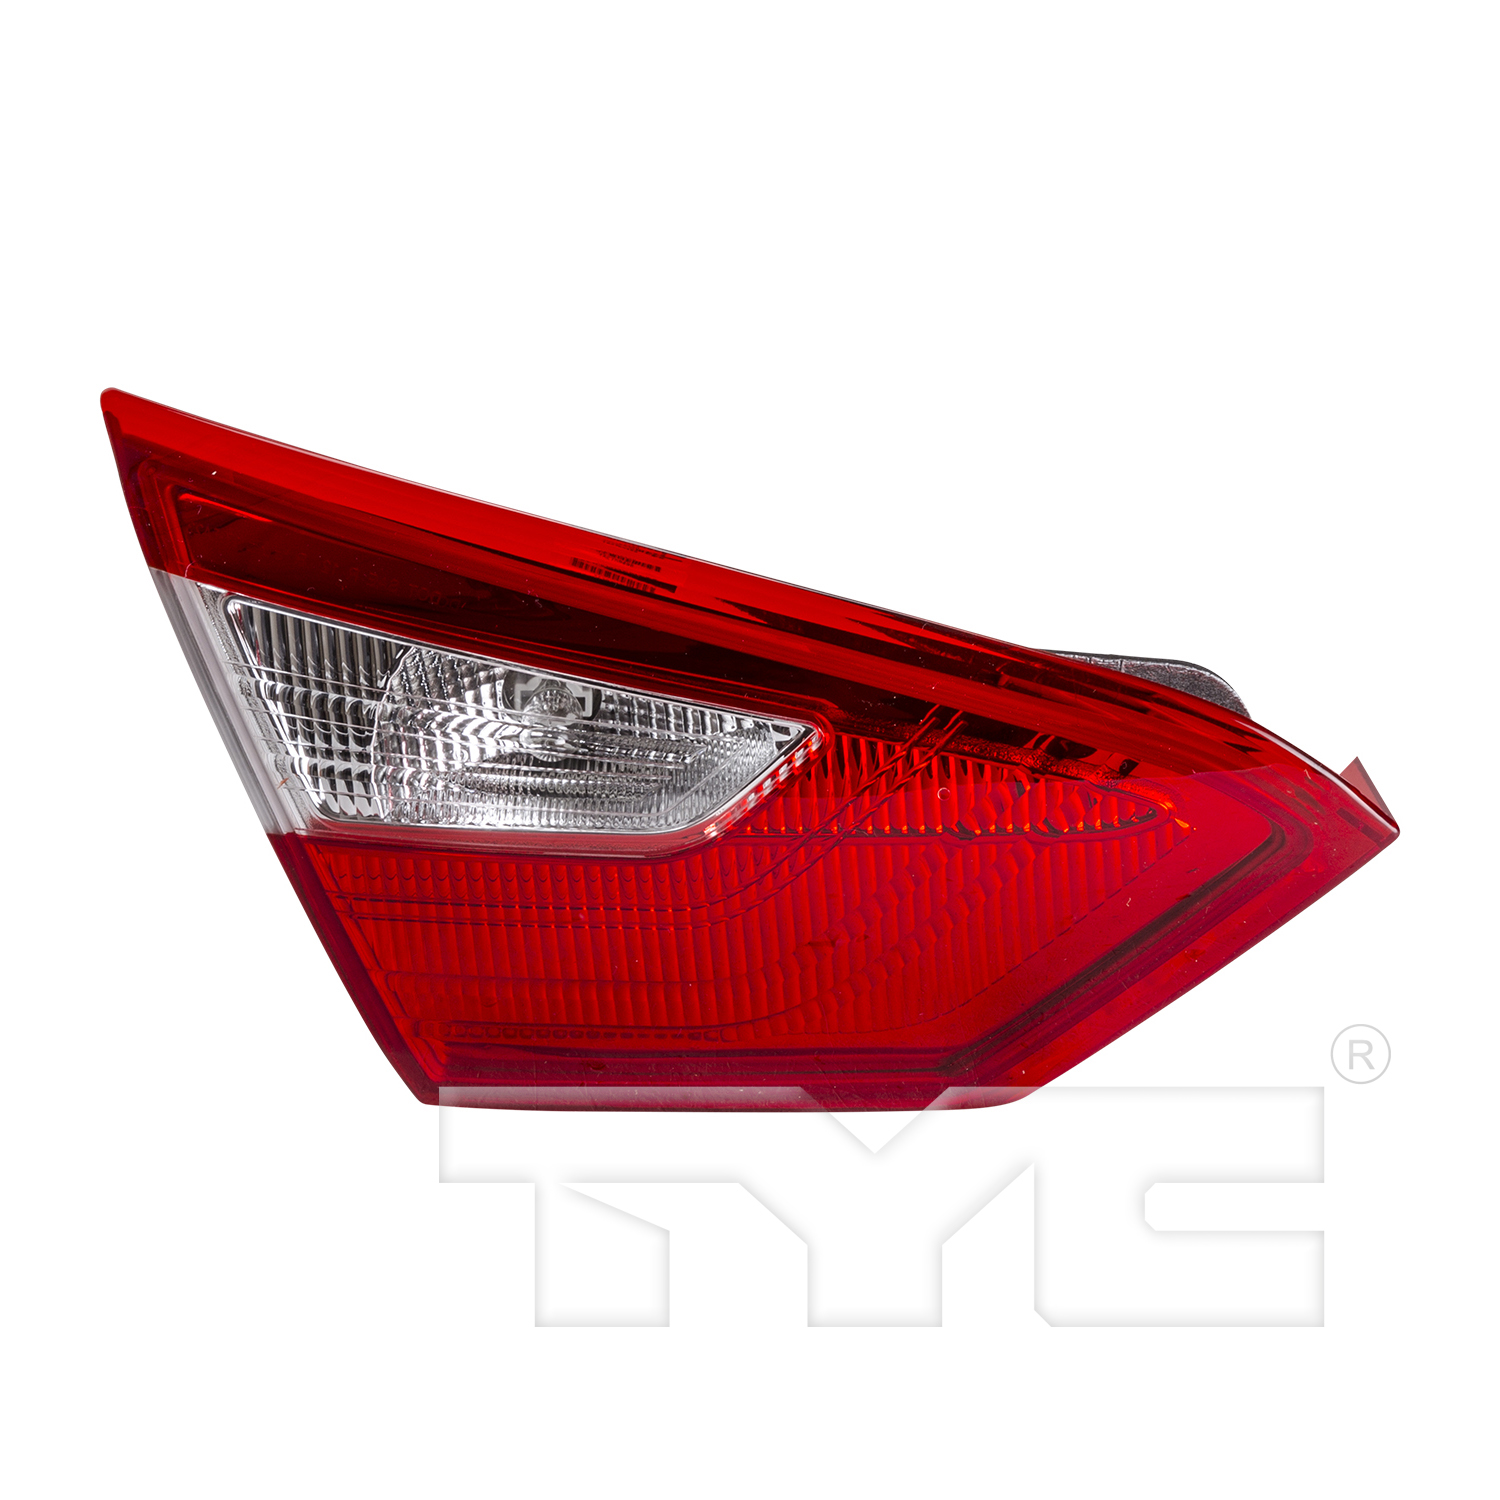 Aftermarket TAILLIGHTS for FORD - FOCUS, FOCUS,12-14,LT Taillamp assy inner